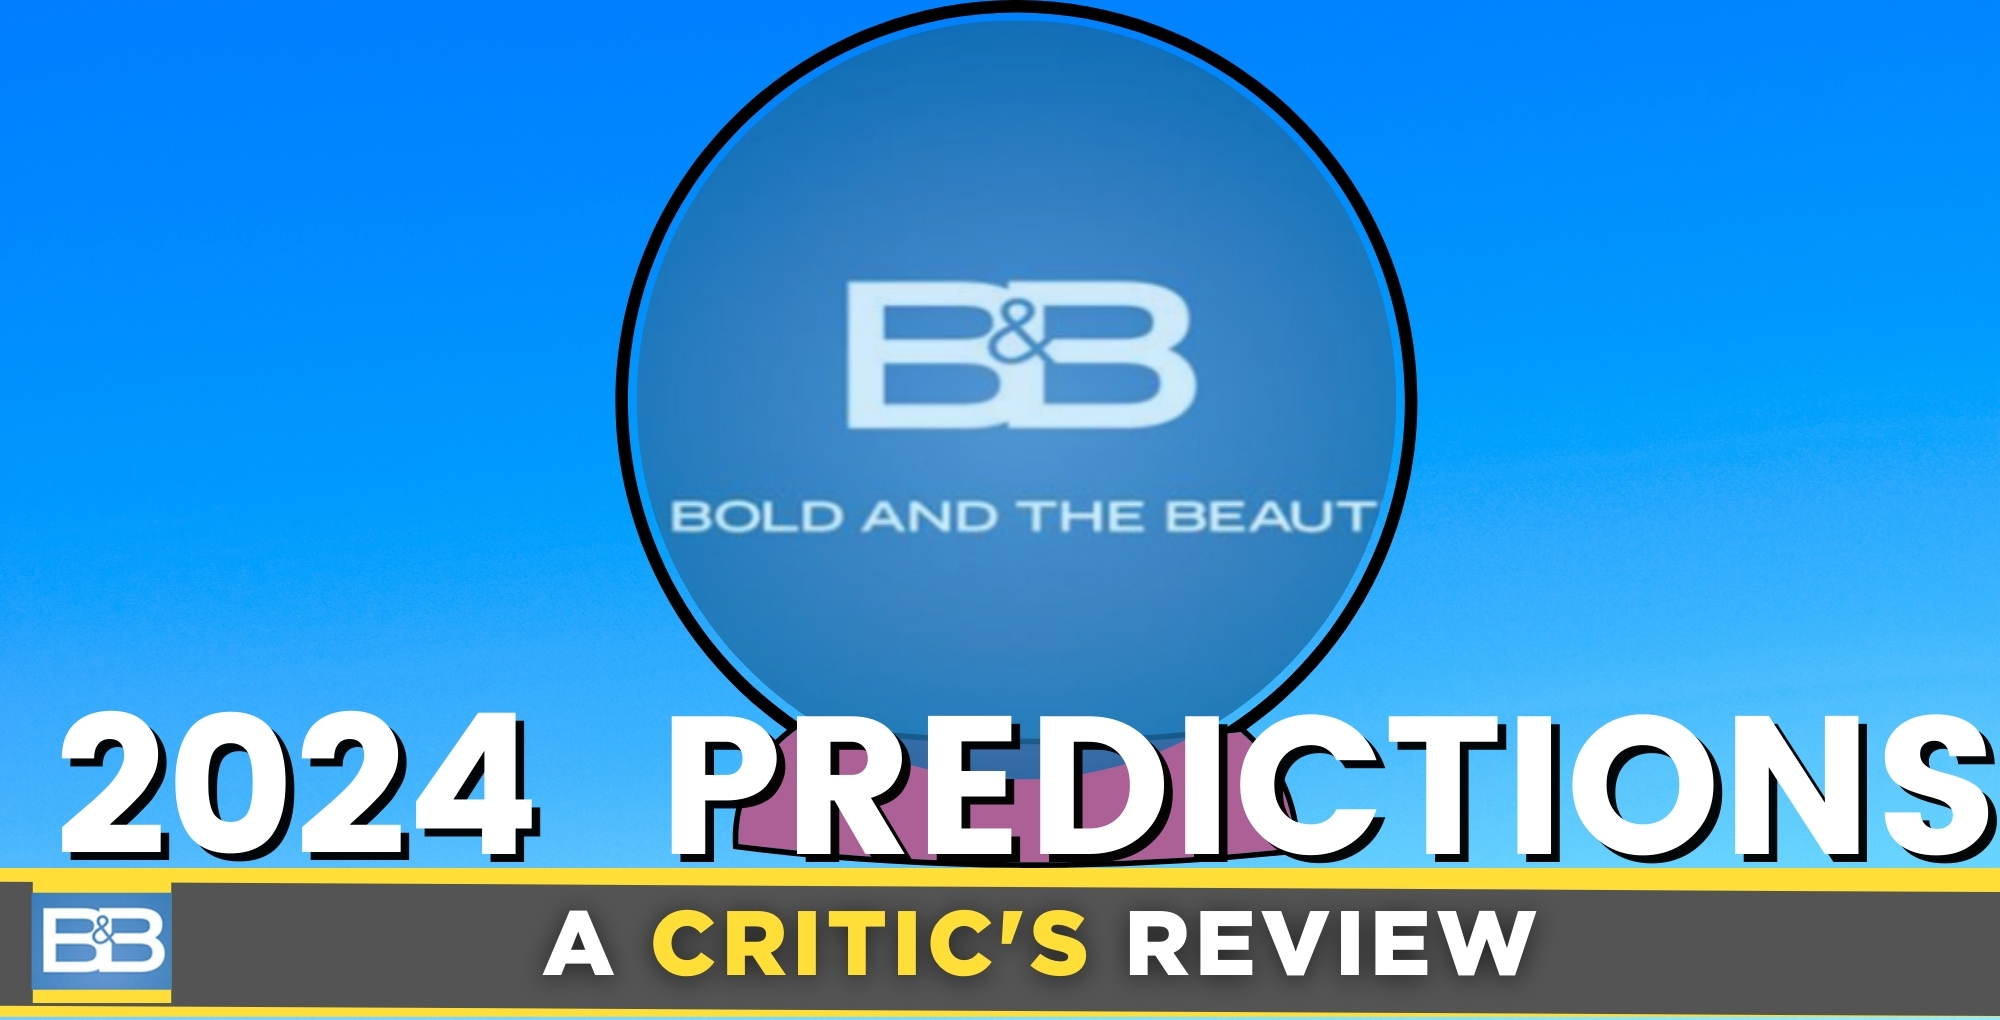 a critic's review of bold and the beautiful, predictions for 2024.